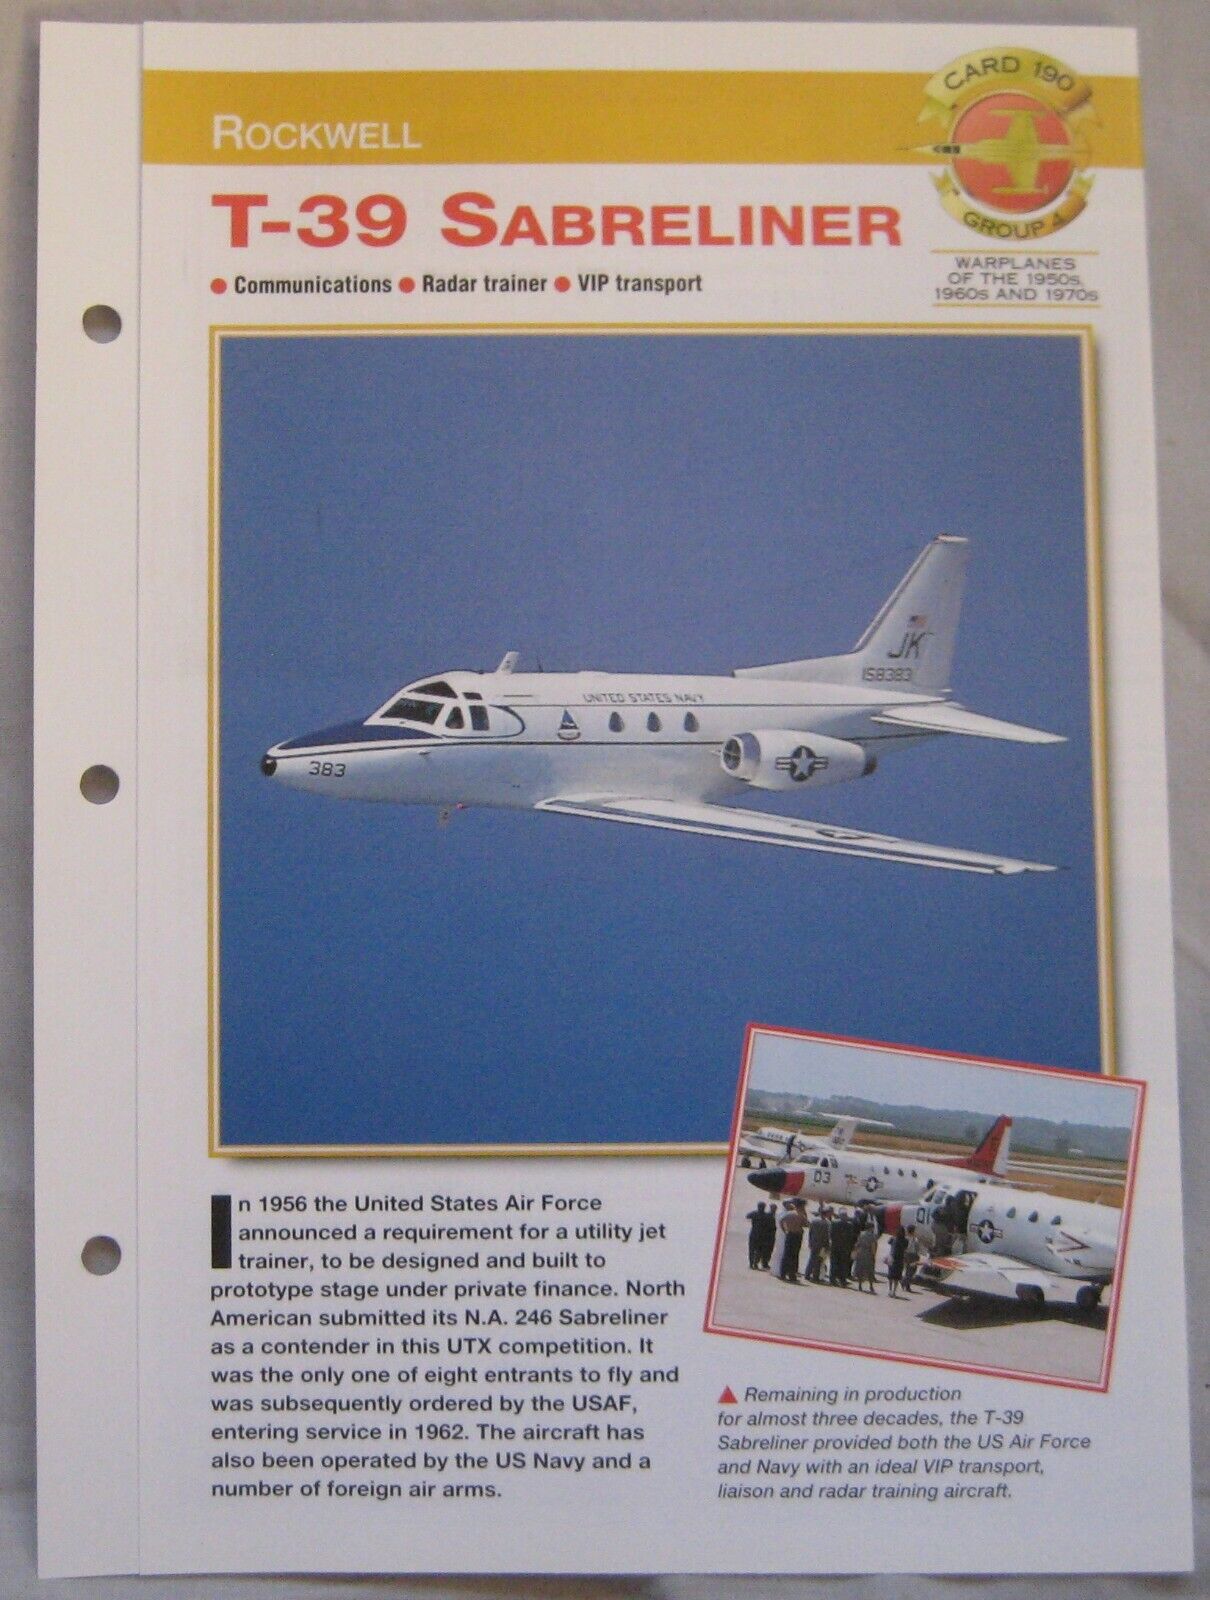 Aircraft of the World Card 190 , Group 4 - Rockwell T-39 Sabreliner